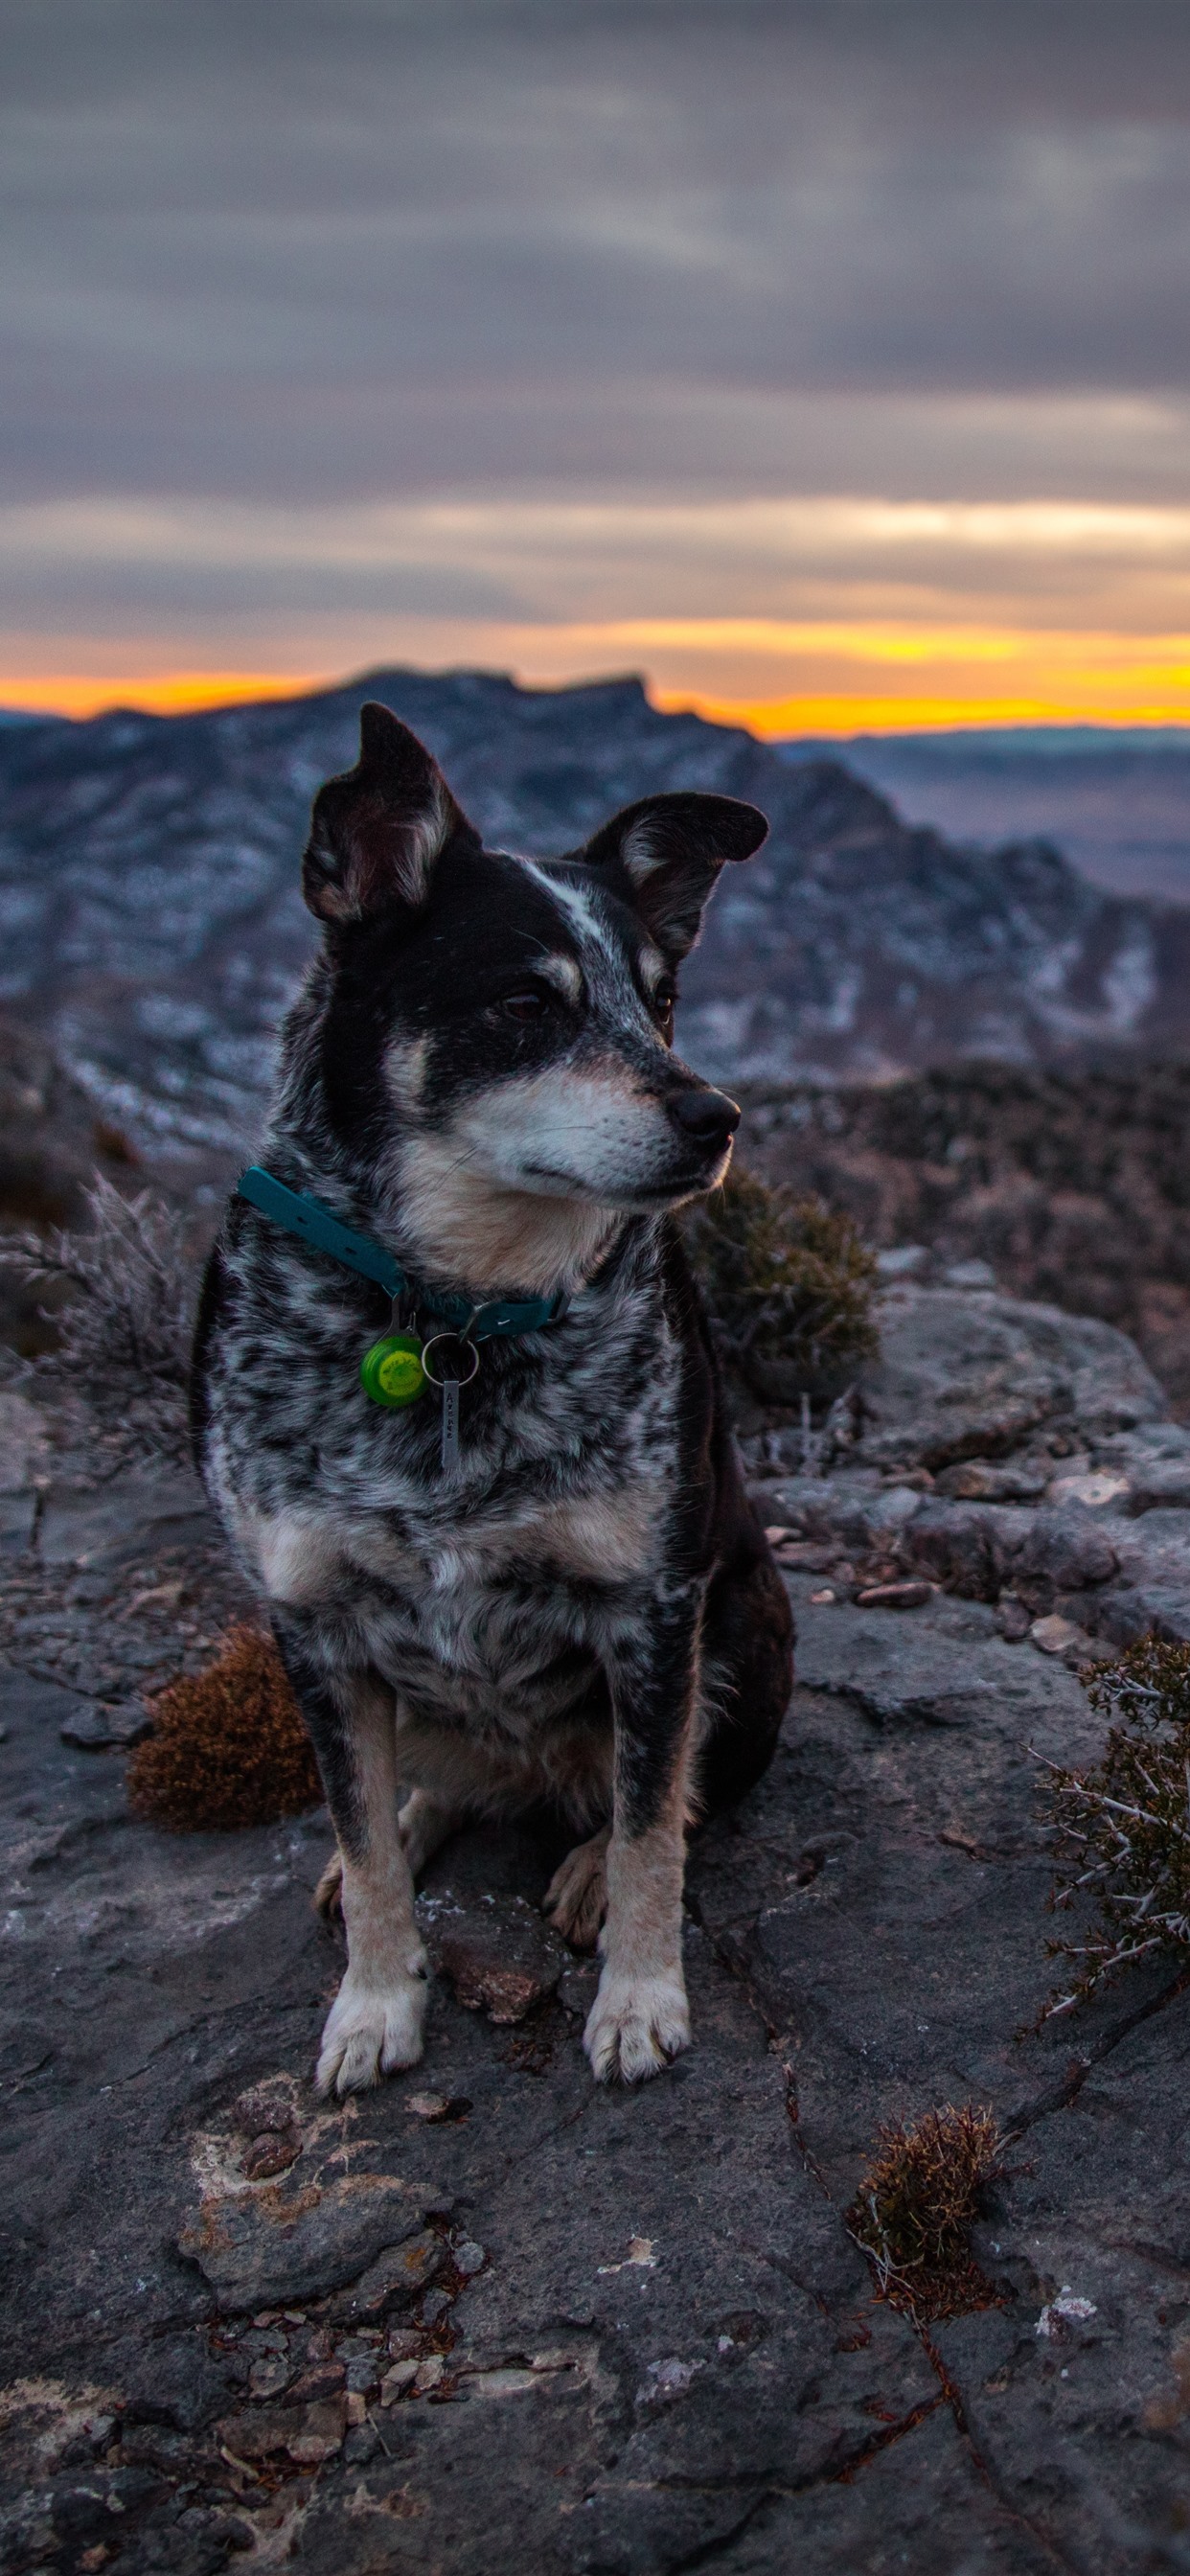 Iphone Wallpaper Dog Sit On Ground, Mountains, Sunset - Iphone Wallpaper Dog - HD Wallpaper 